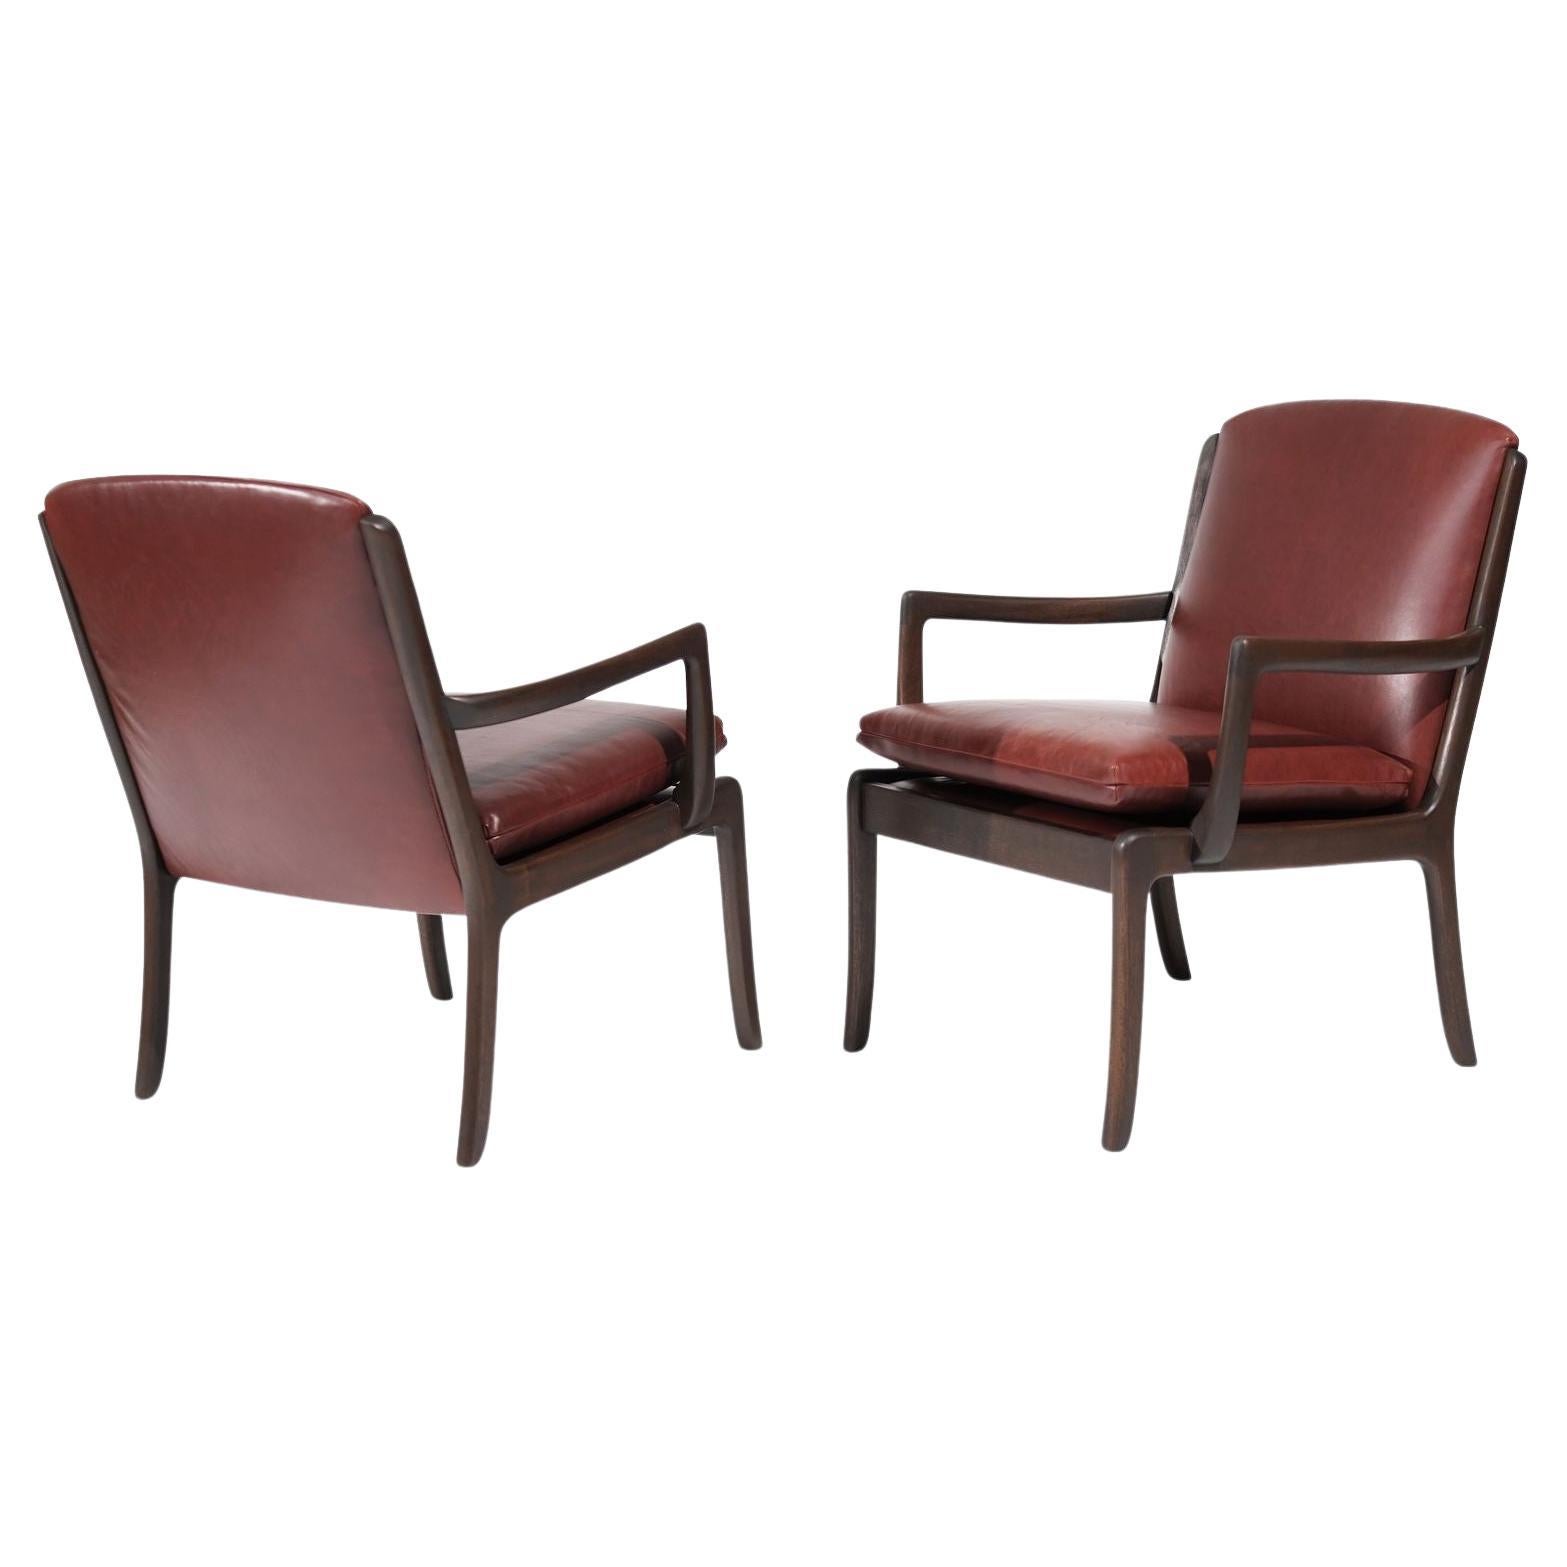 Set of Lounge Chairs by Ole Wanscher in Sangria Leather, Denmark, C. 1960s For Sale